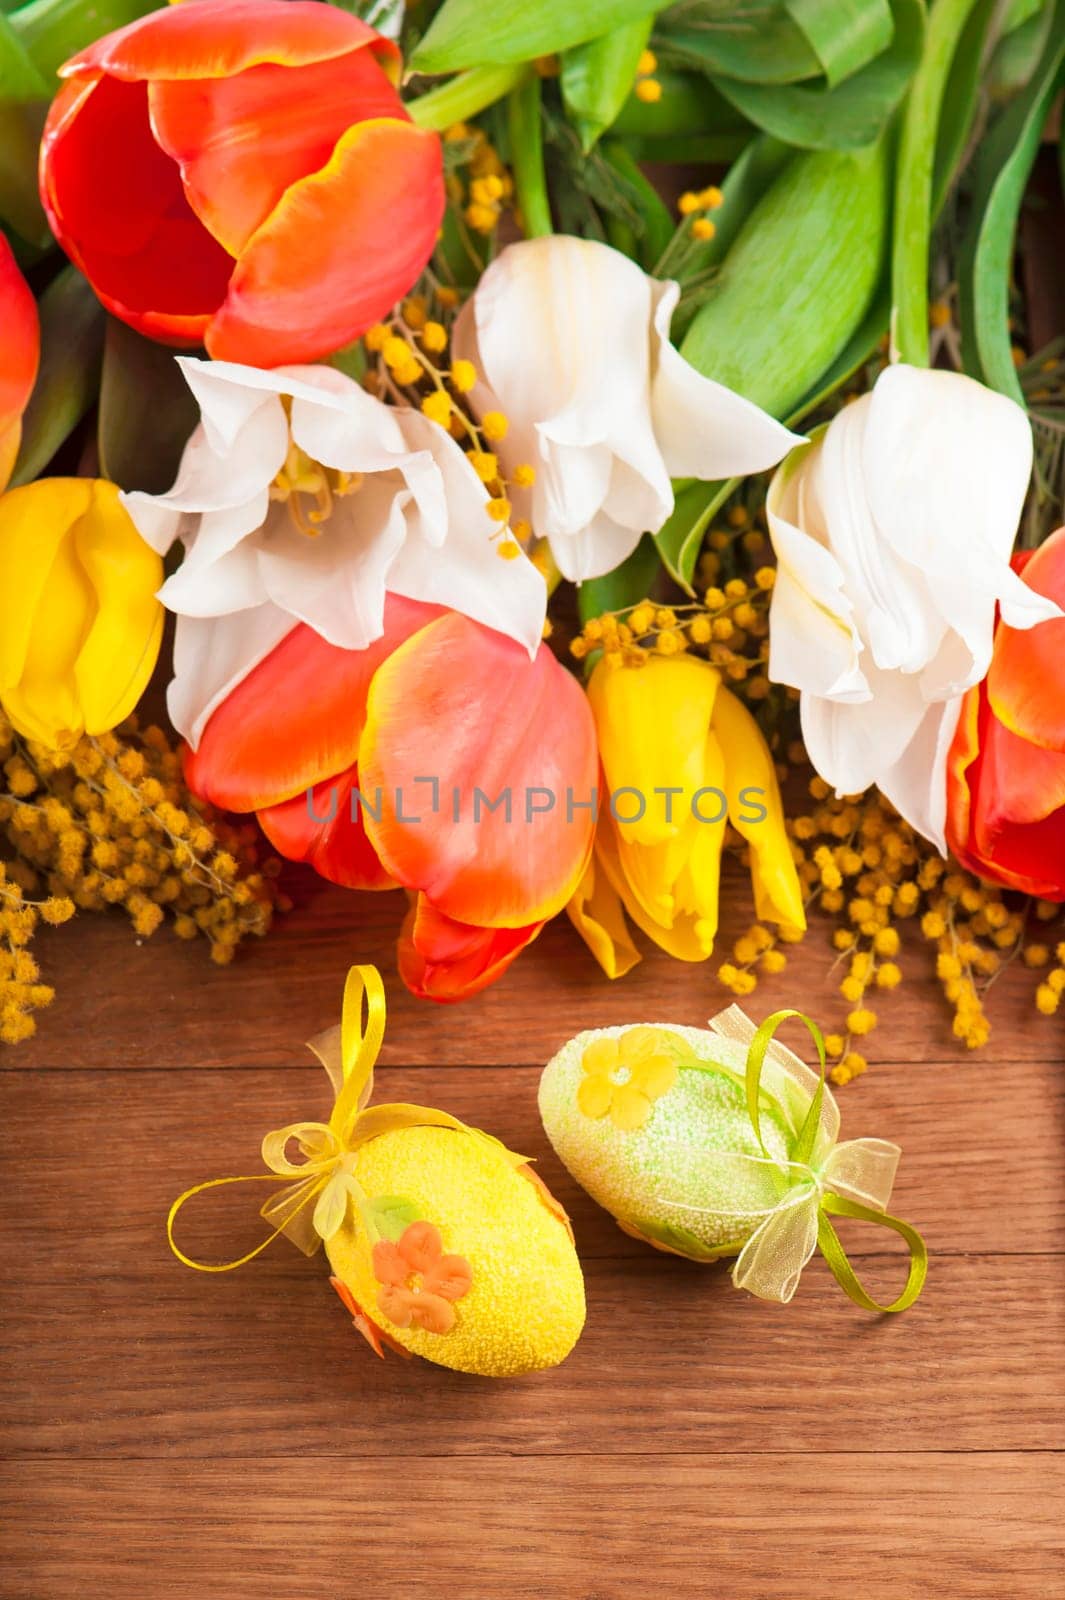 Yellow, red and white spring flowers on wooden background, tulips. by aprilphoto